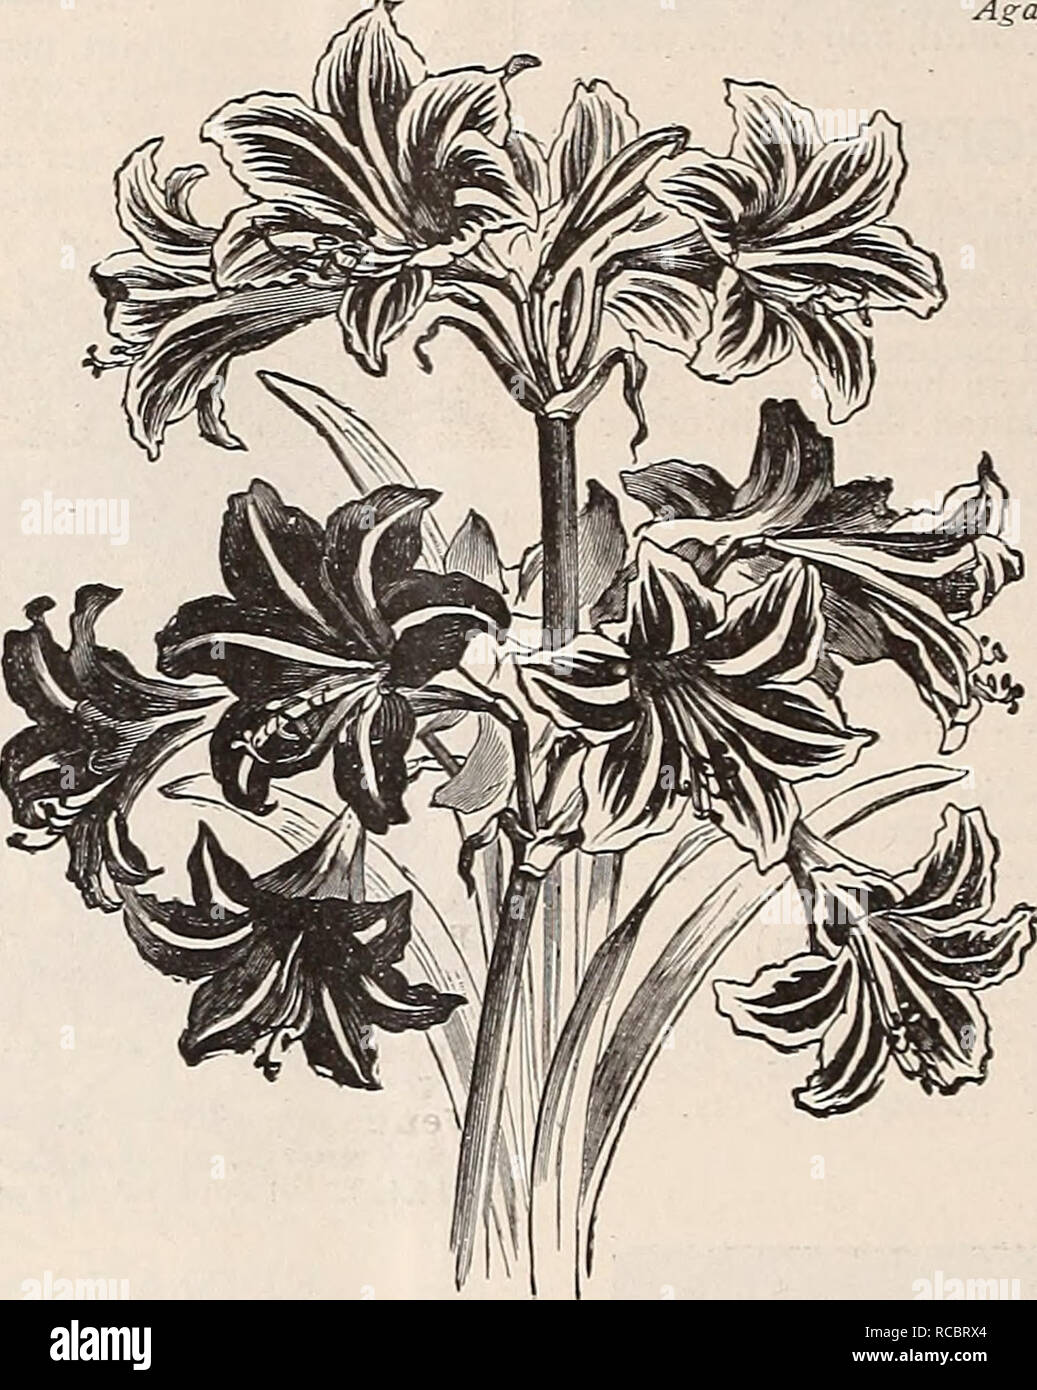 . Dreer's autumn catalogue : 1895. Bulbs (Plants) Catalogs; Flowers Seeds Catalogs; Gardening Equipment and supplies Catalogs; Nurseries (Horticulture) Catalogs; Fruit Seeds Catalogs. Agapanthus. AGAPANTHUS. (African Lily.) Splendid ornamental plants, bearing large clusters of bright blue and pure white flowers on long flower stalks, and lasting a iong time in bloom. There is no finer plant than this for outdoor decoration, planted in large pots or tubs on the lawn, terrace or piazza. It does well in the house or greenhouse in winter, requir- ing but slight protection. It is a rapid grower and Stock Photo